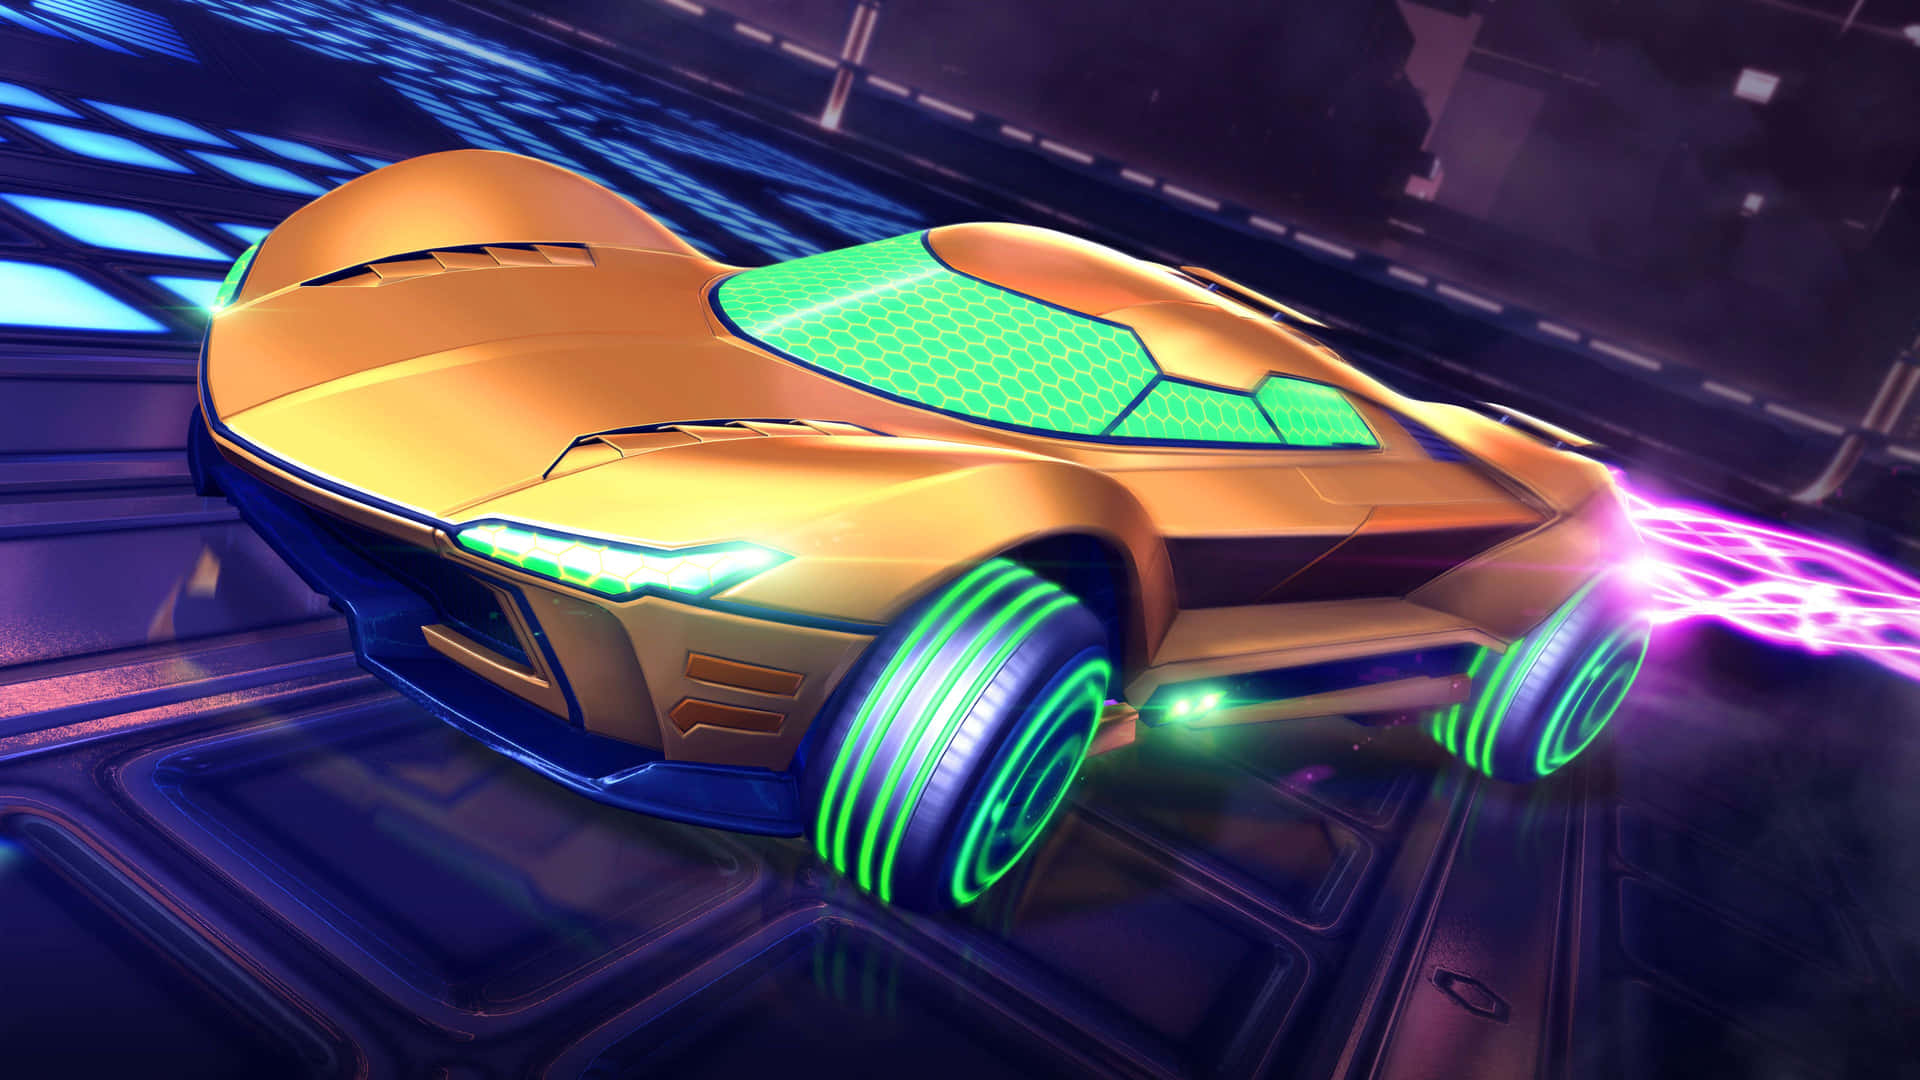 Play Your Best Game of Rocket League With Our Sporty Wallpaper